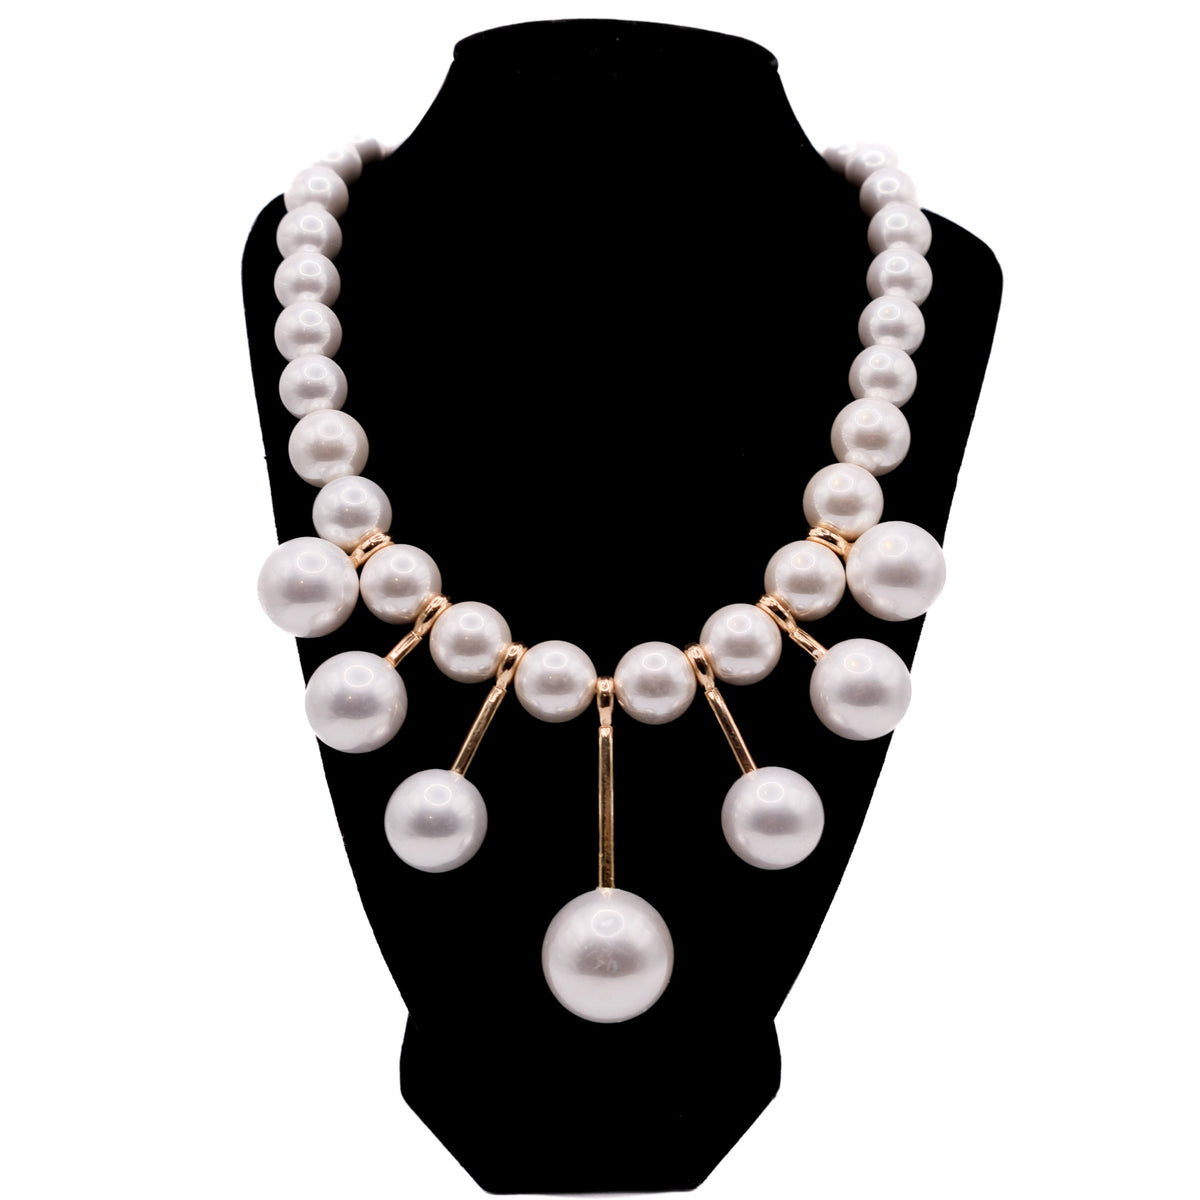 Statement Drop Pearl Necklace